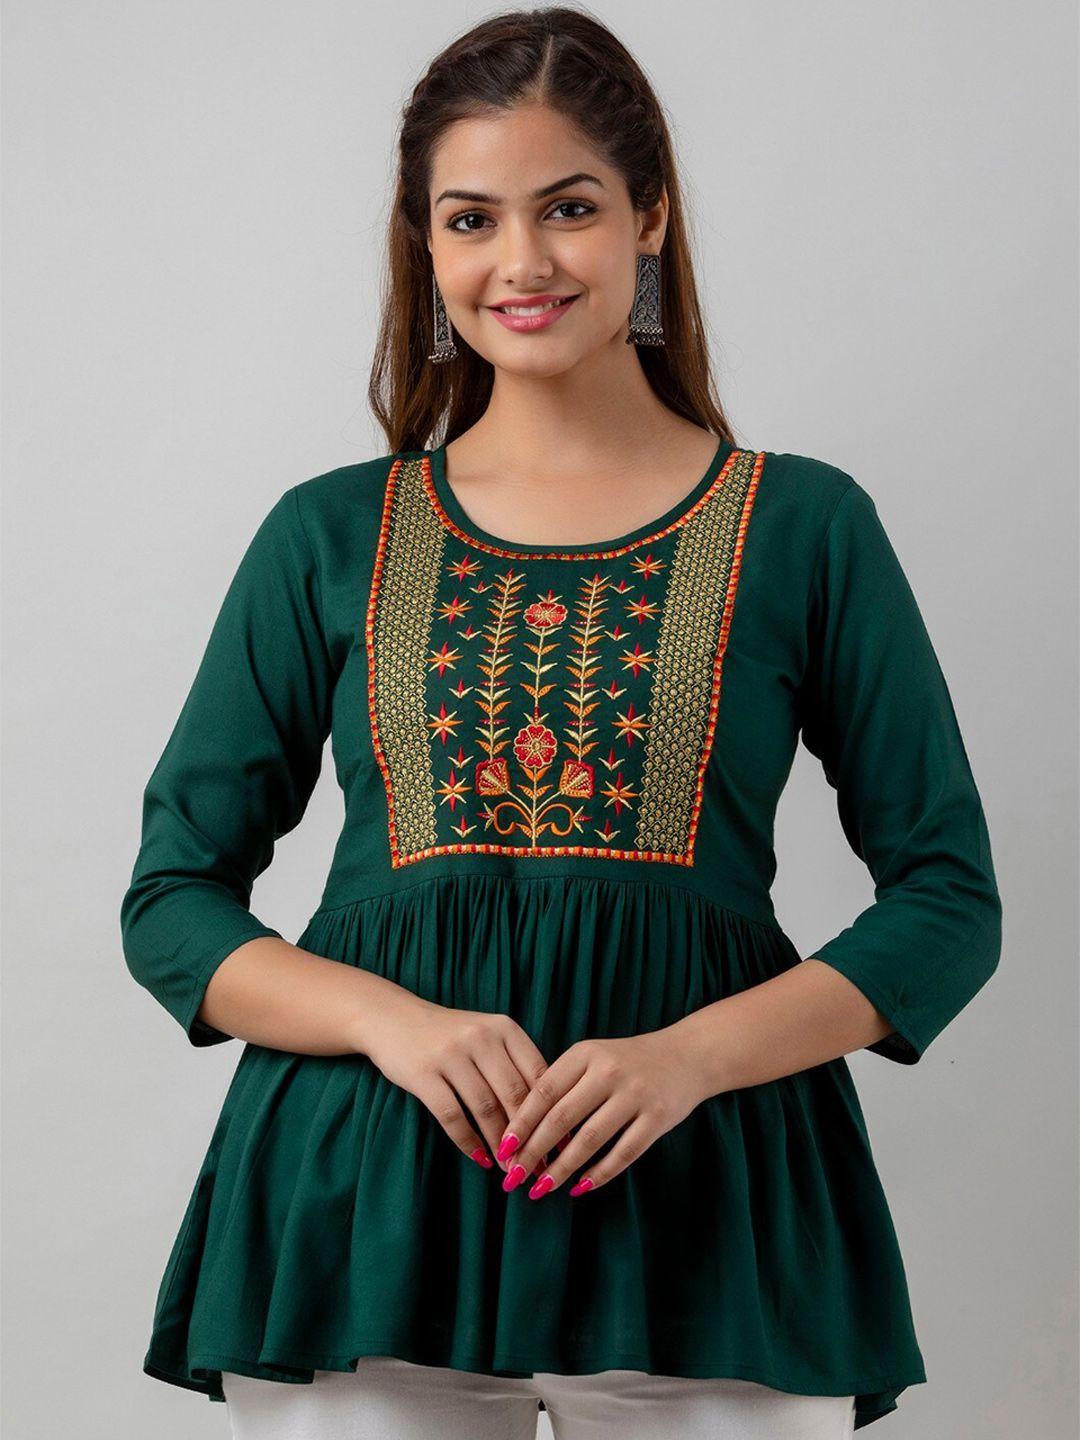 women embroidered cinched waist top